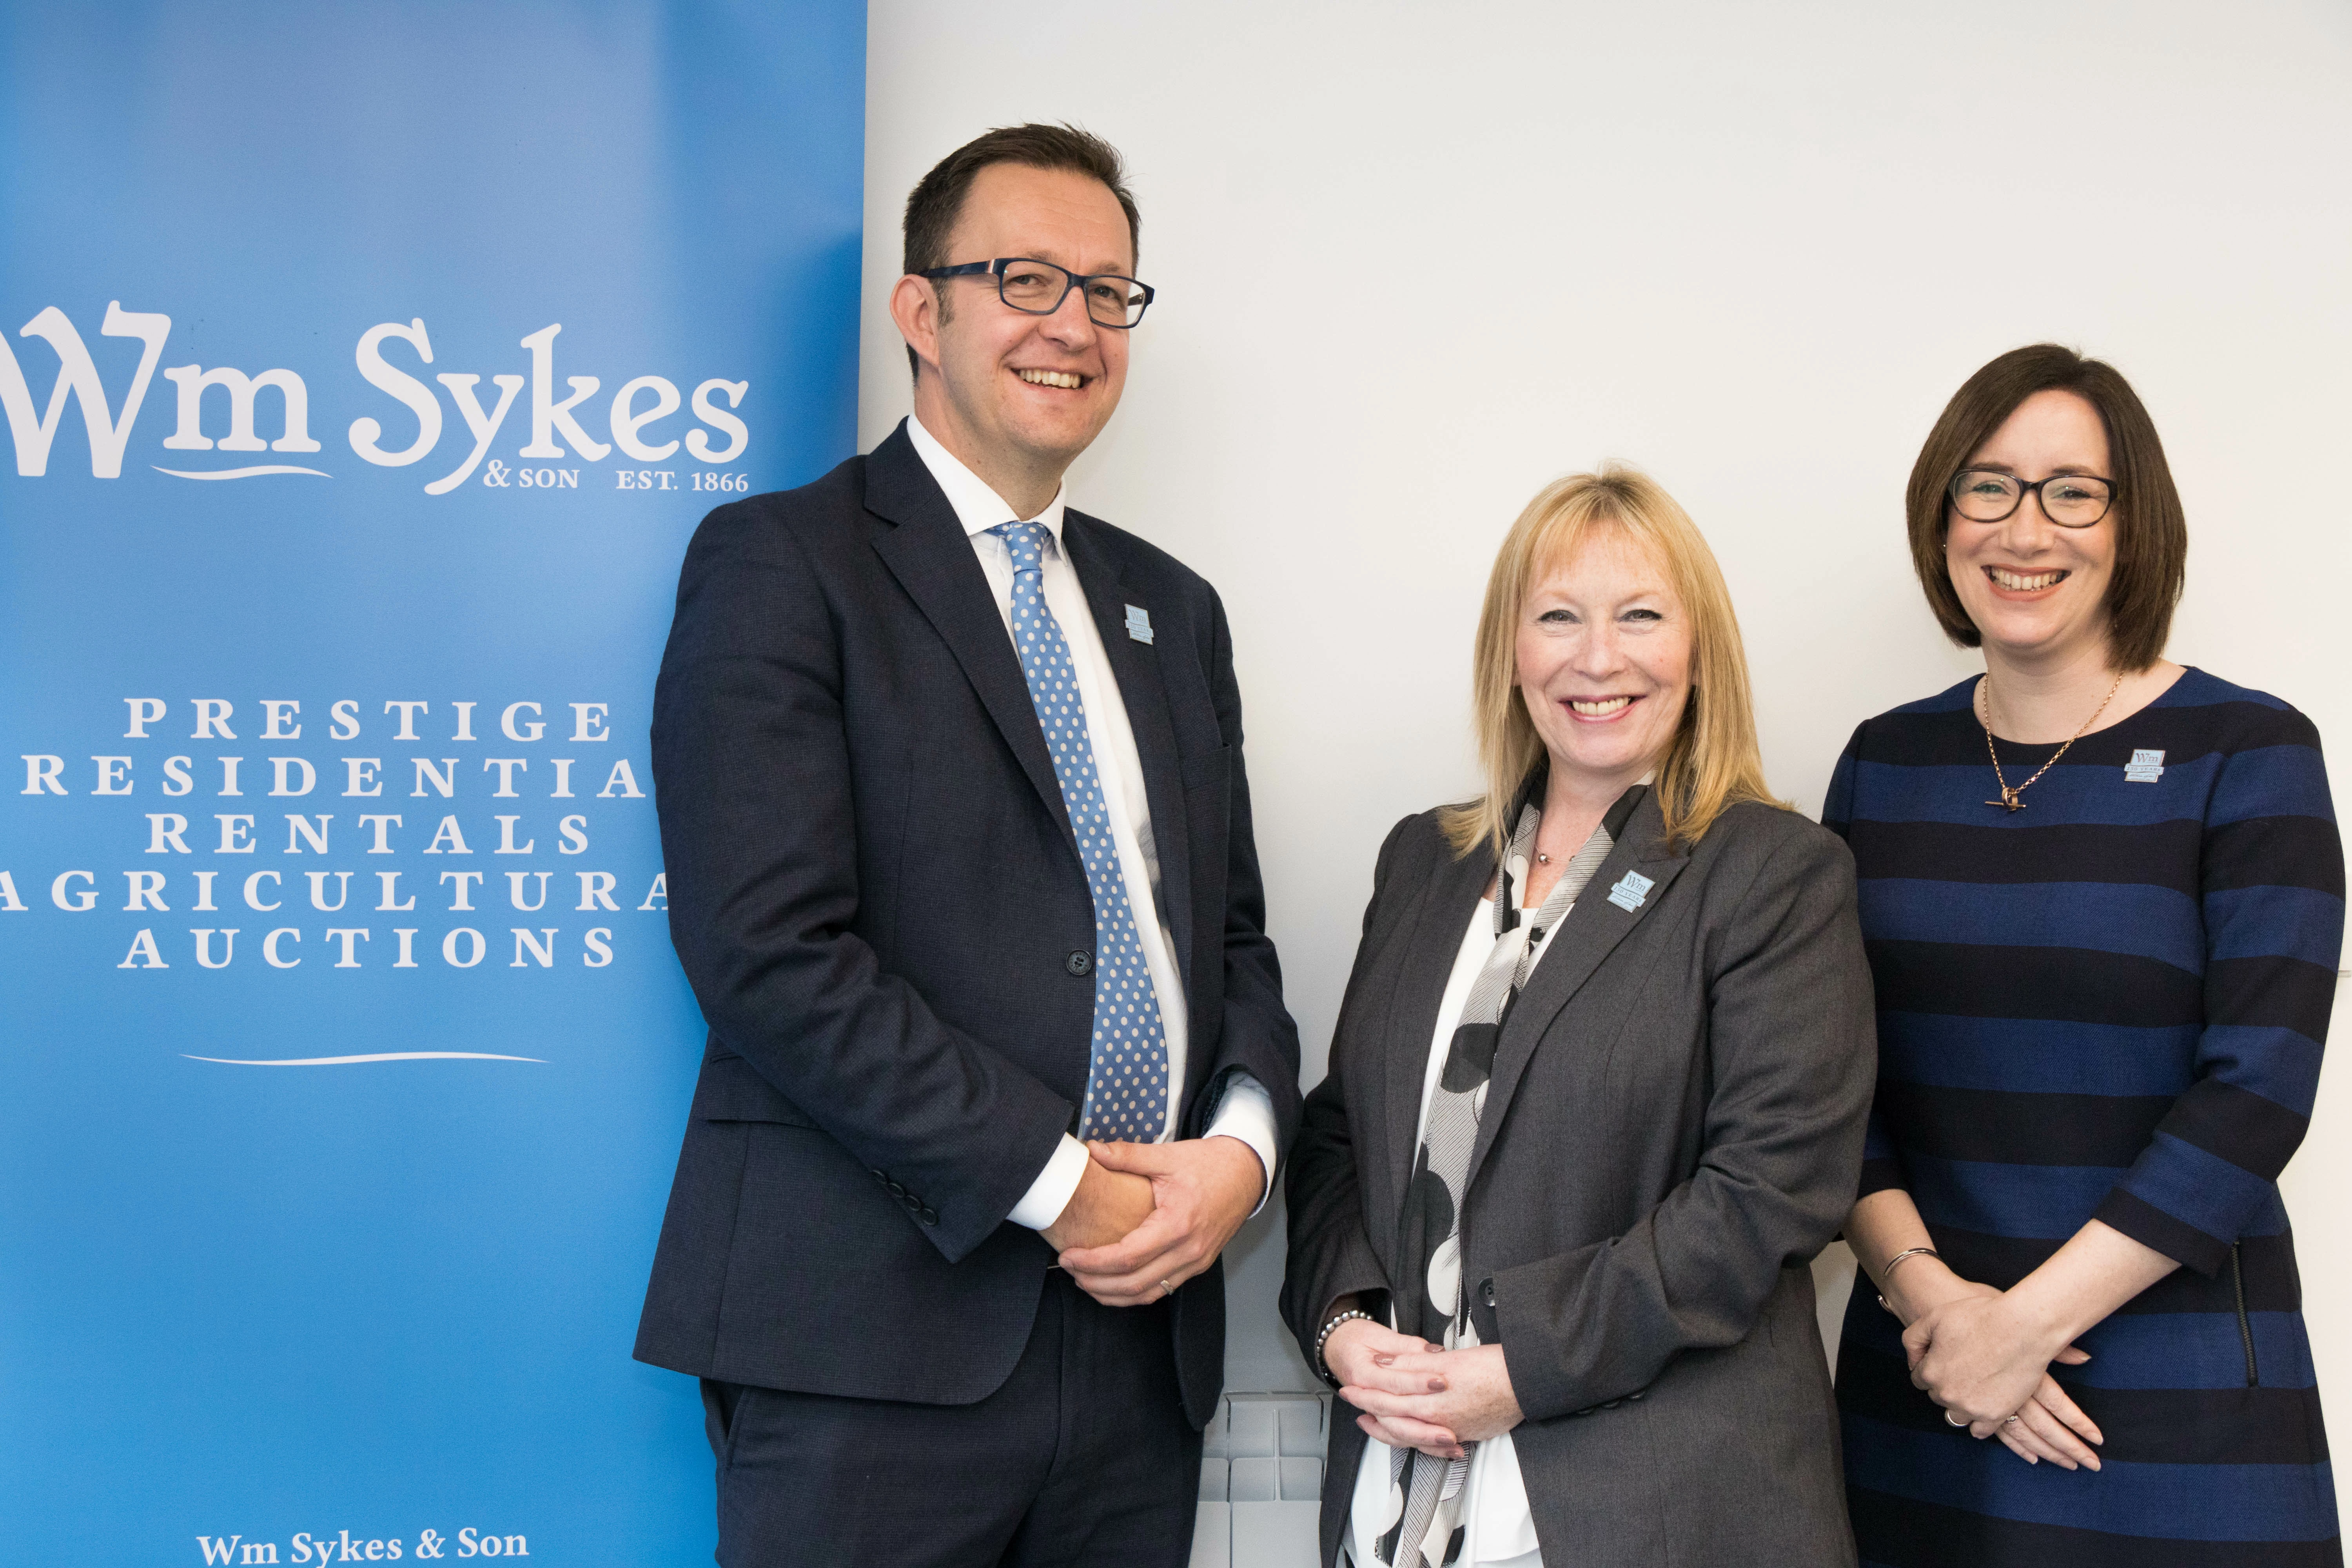 Rob Dixon, Jane Stocks and Louise Dixon launch the new branch